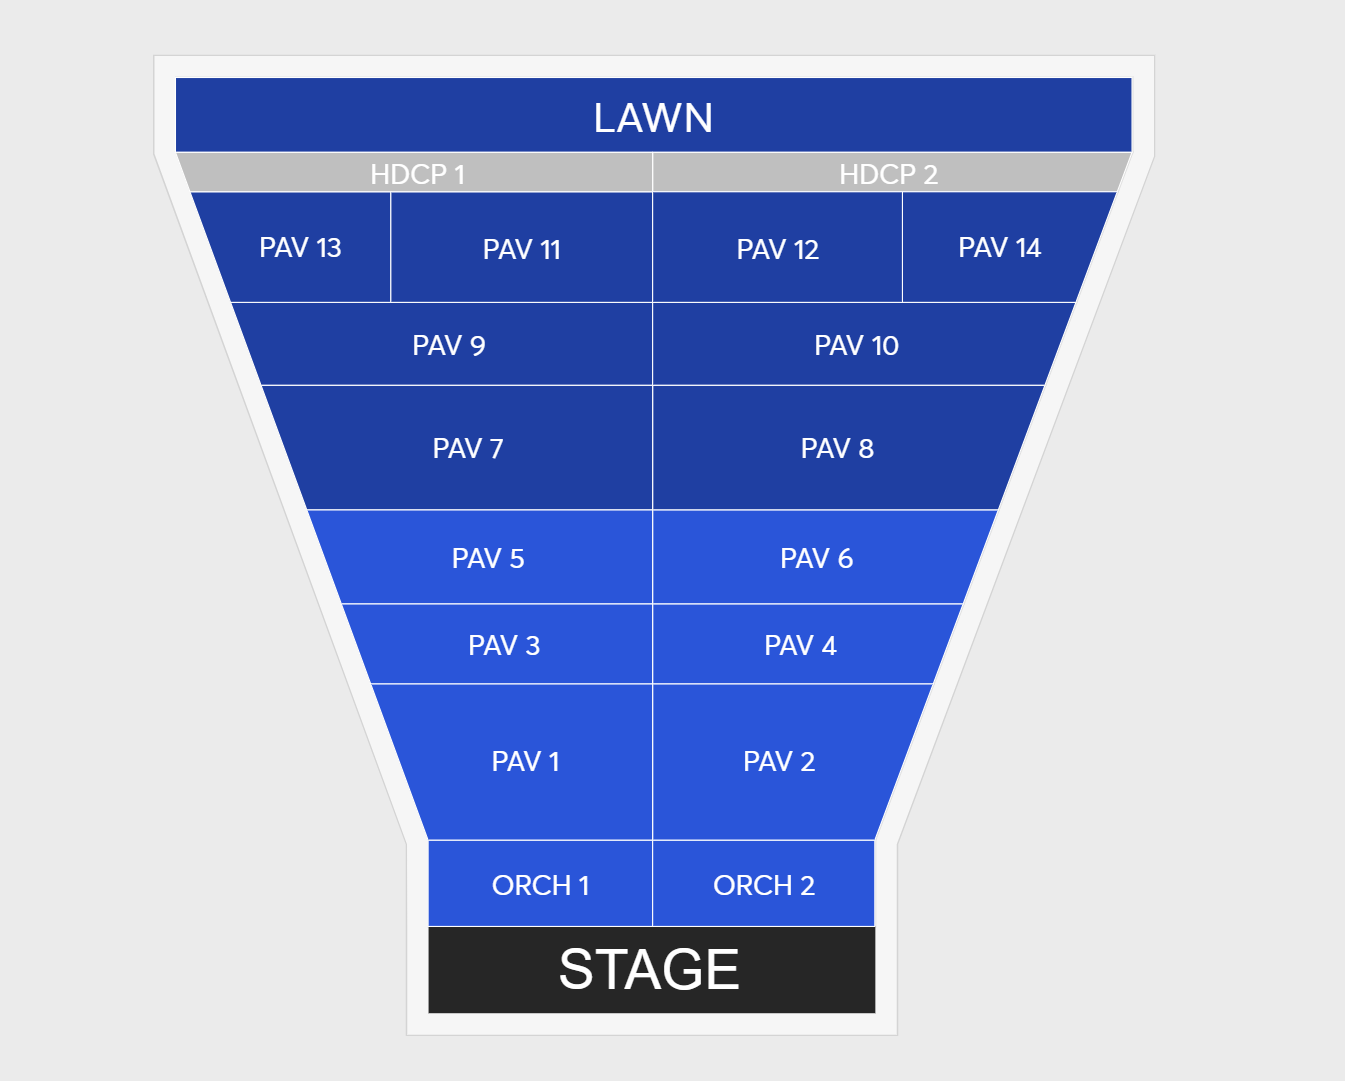 Lawn seats are priced at $39.50 while Official Platinum seats close to the stage are over $300